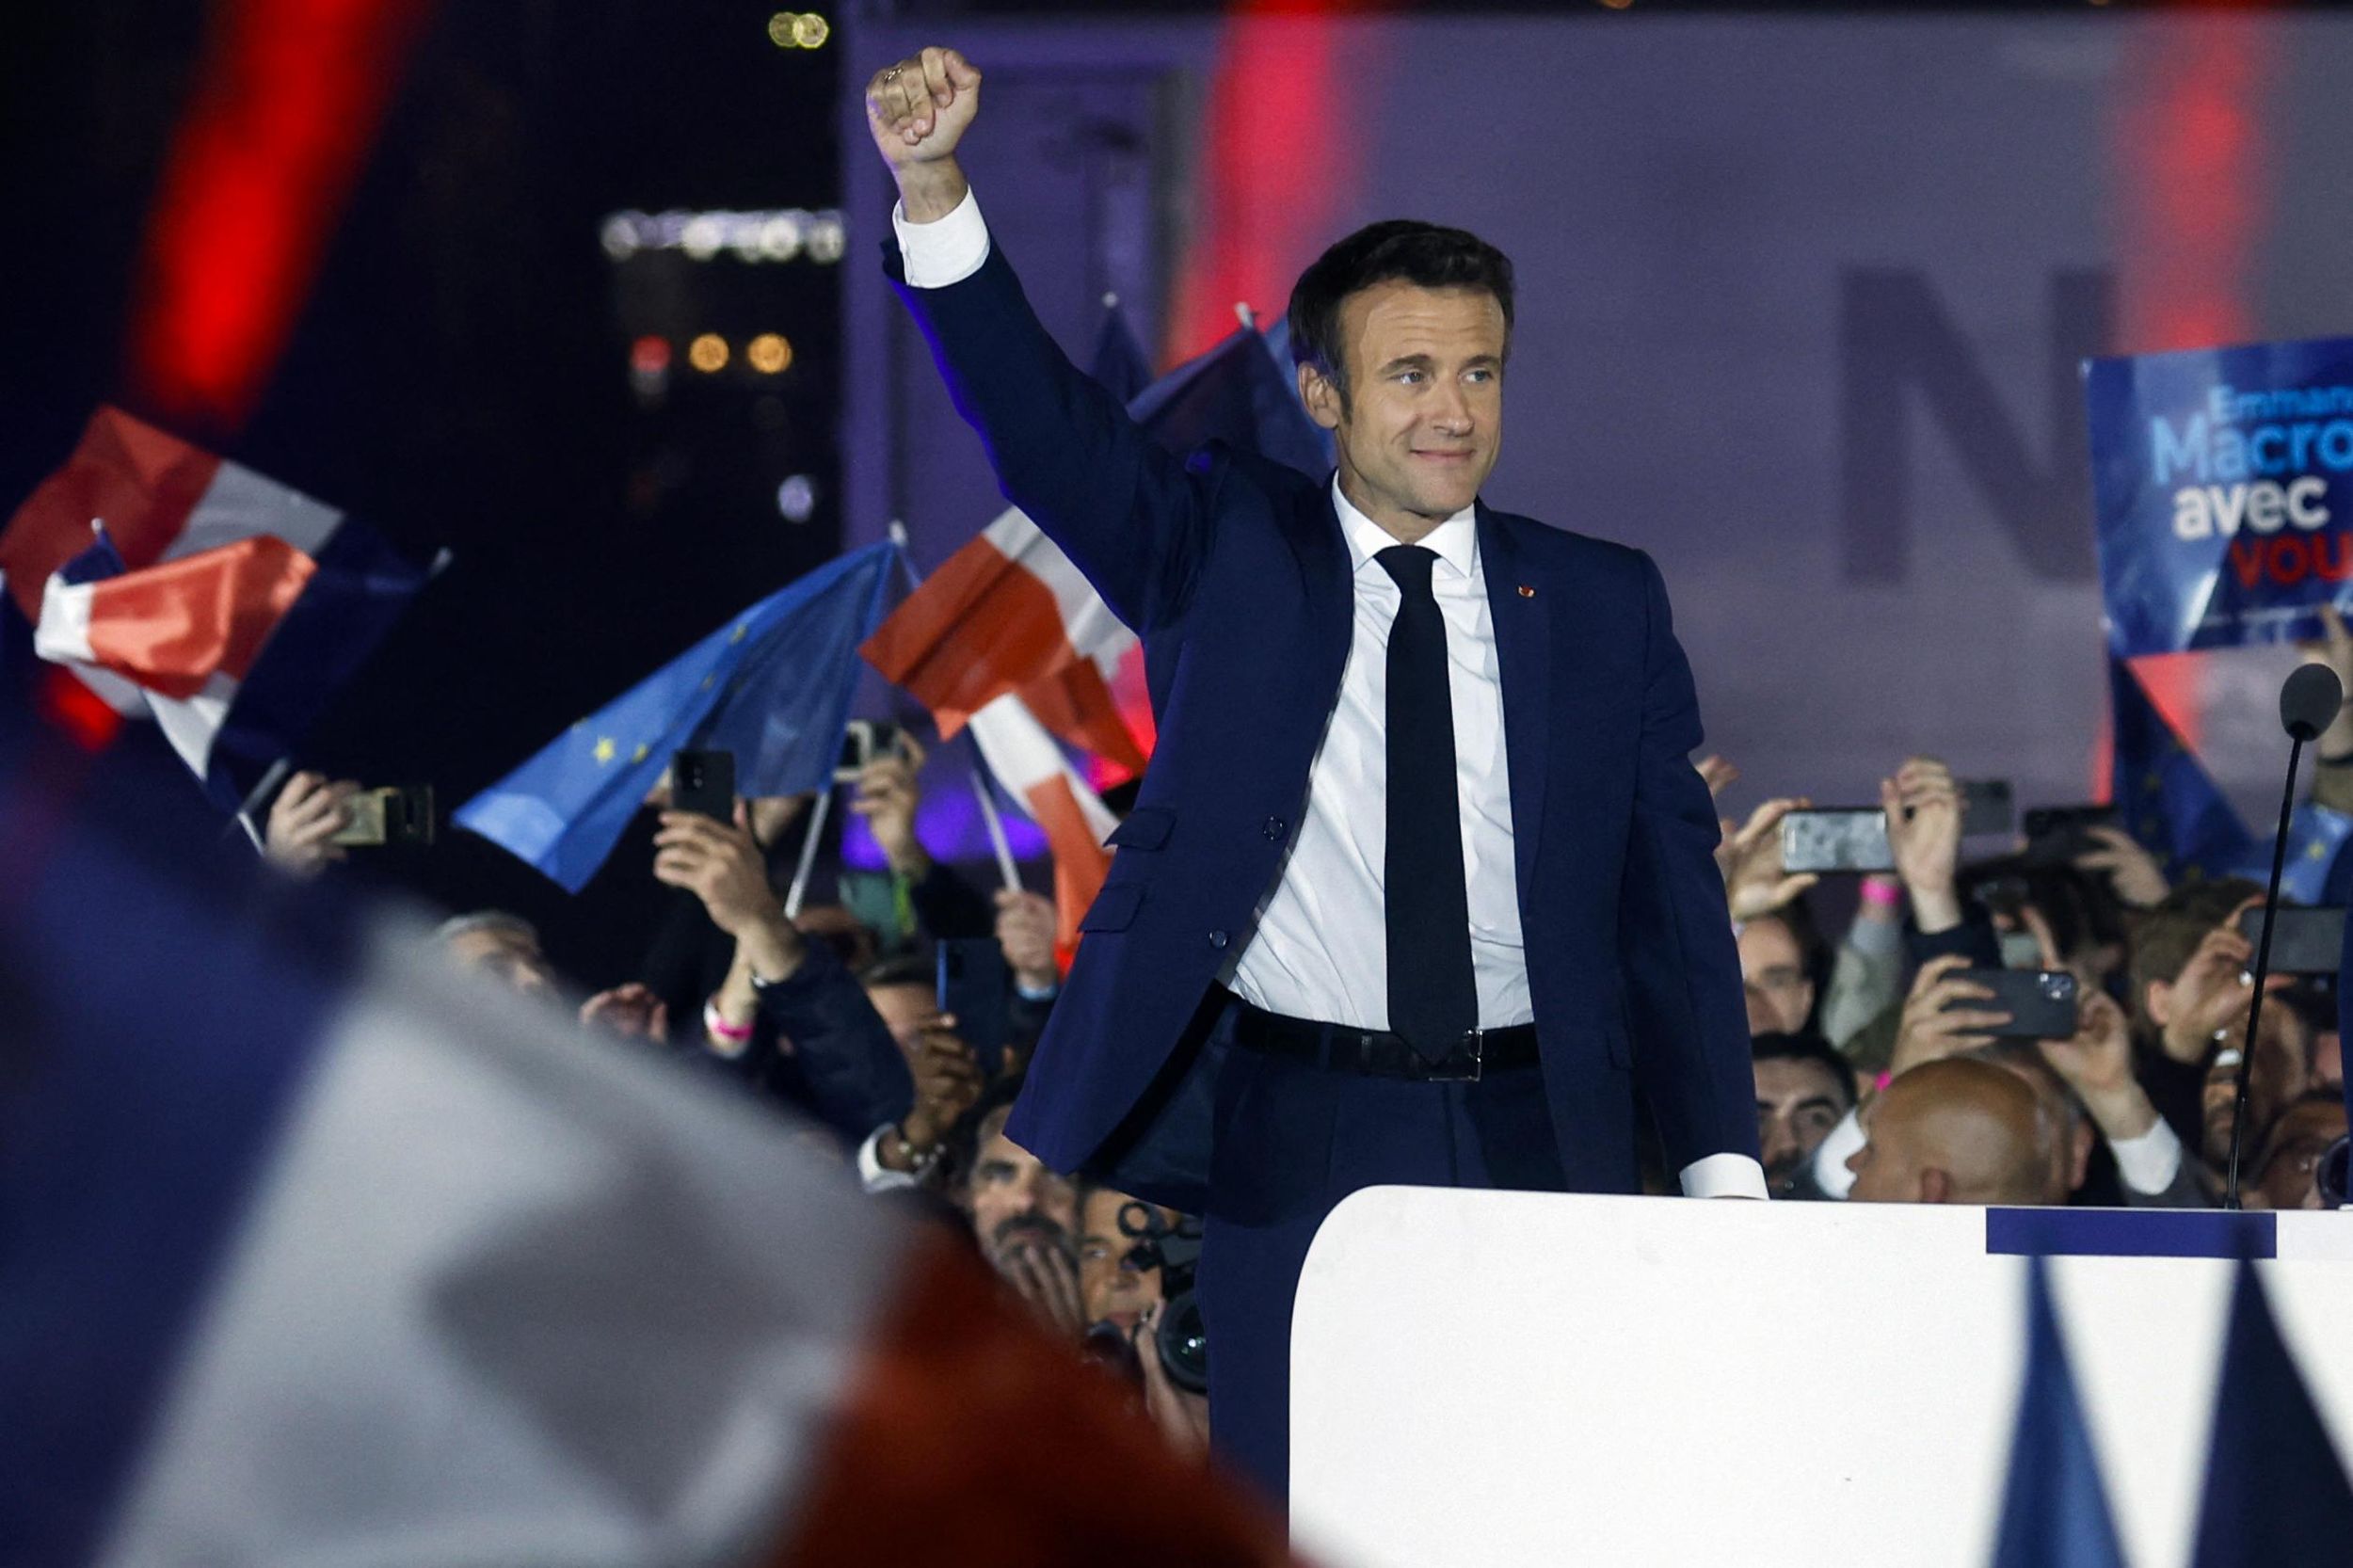 Can Macron unite a divided France?